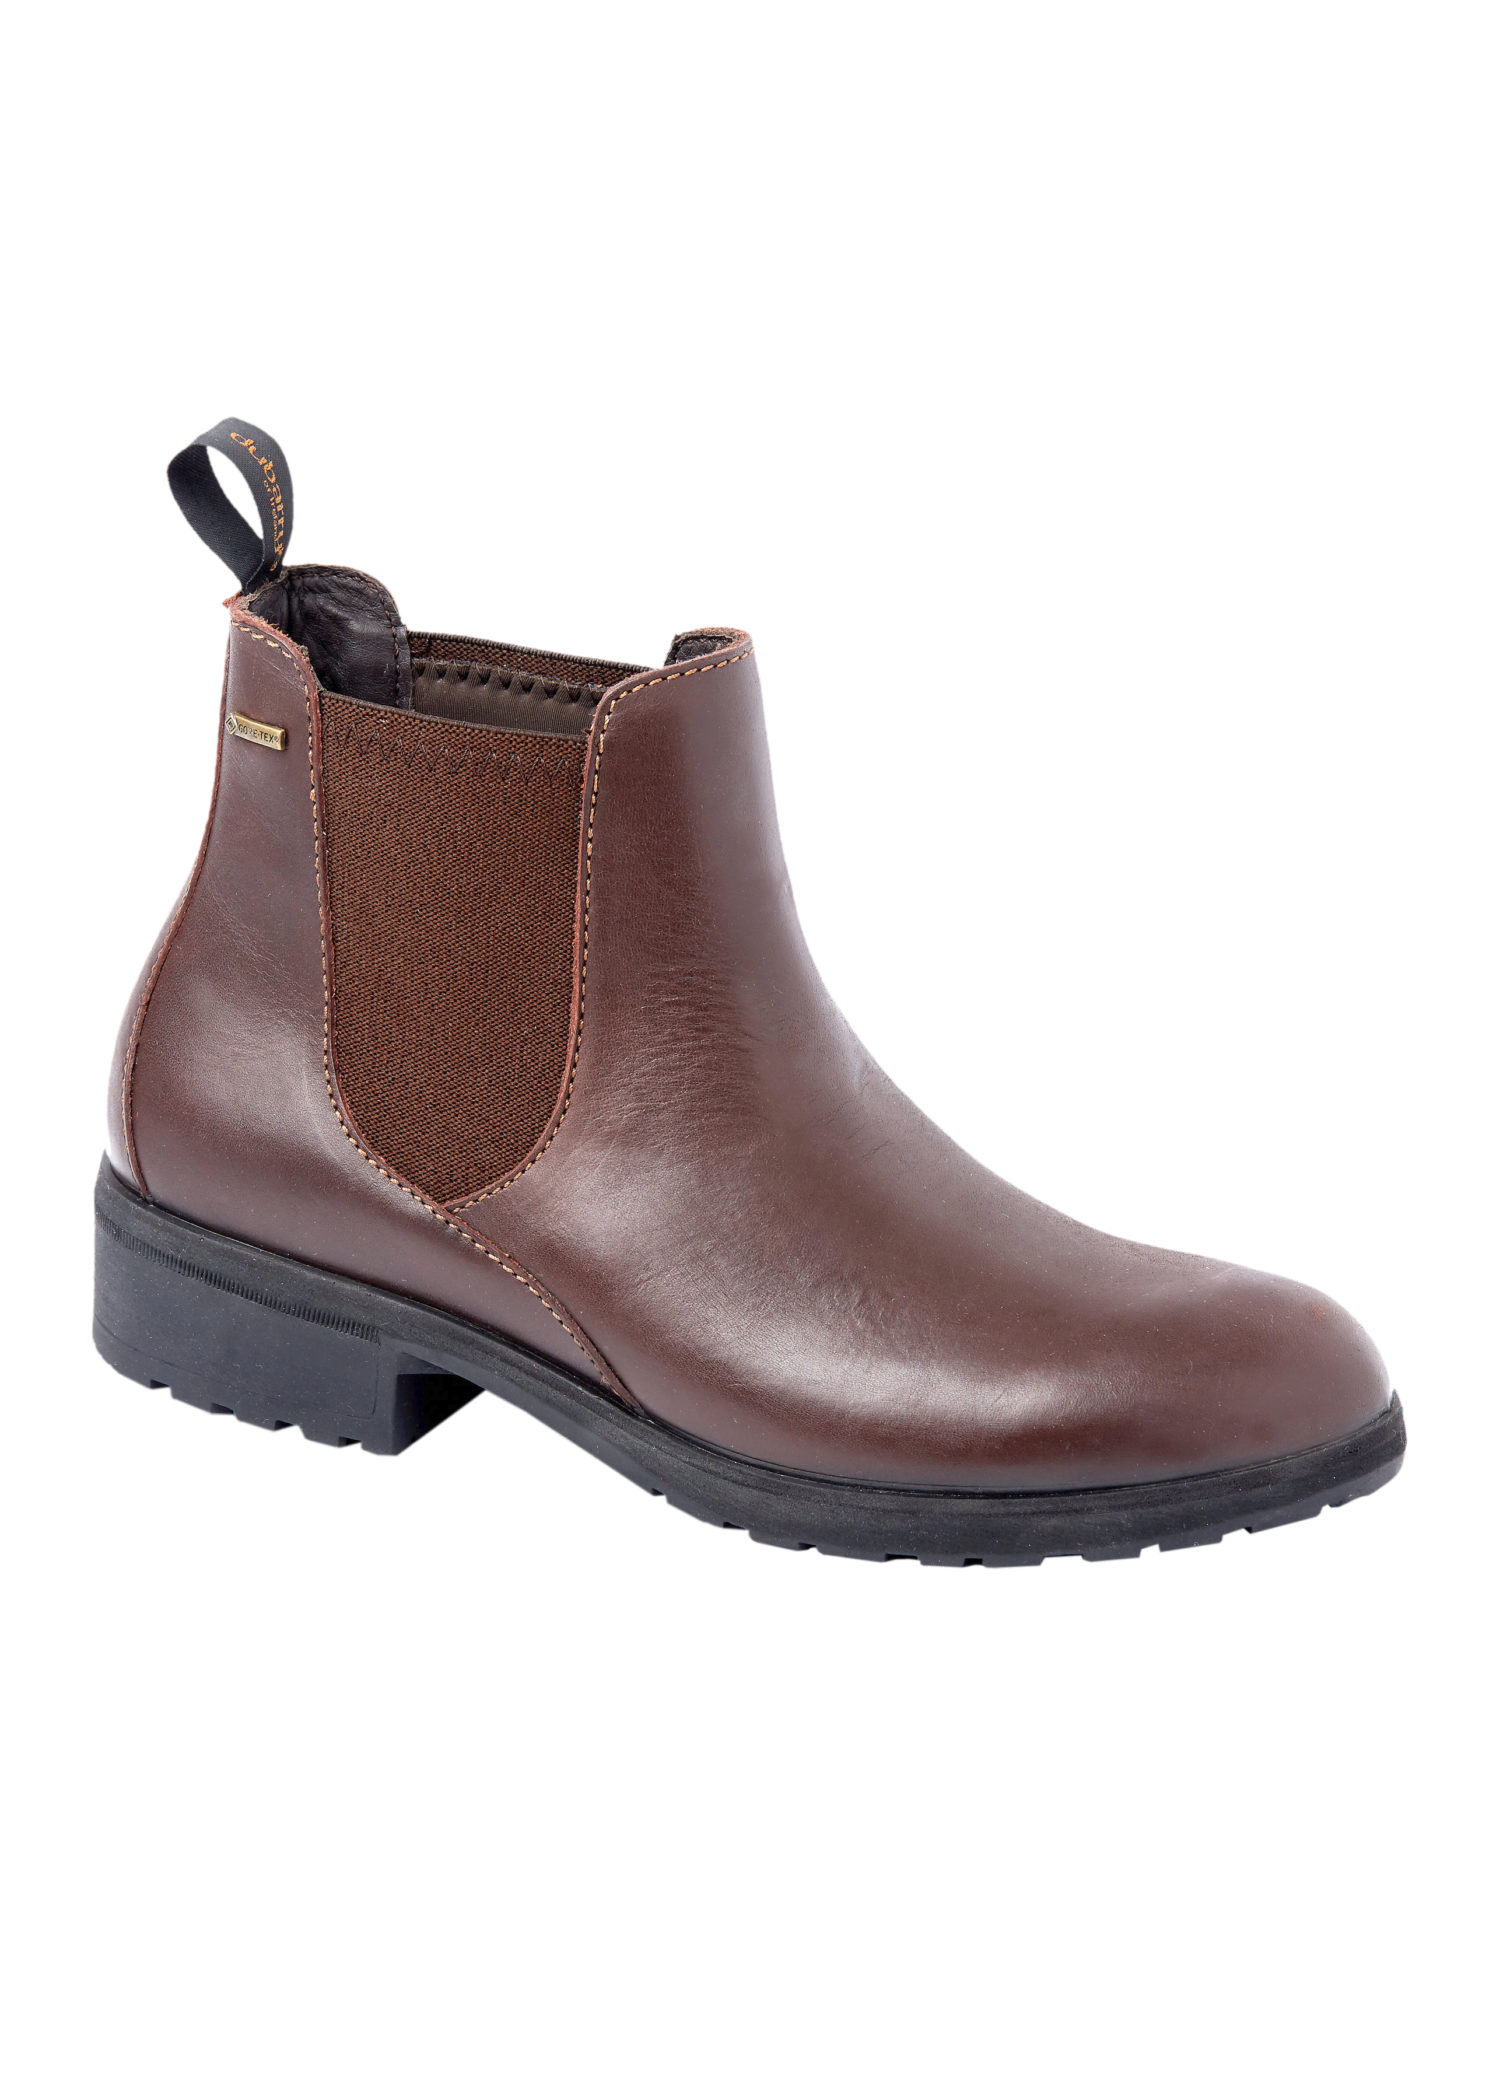 Dubarry Waterford Women’s Boot – Welsh Farmhouse Company